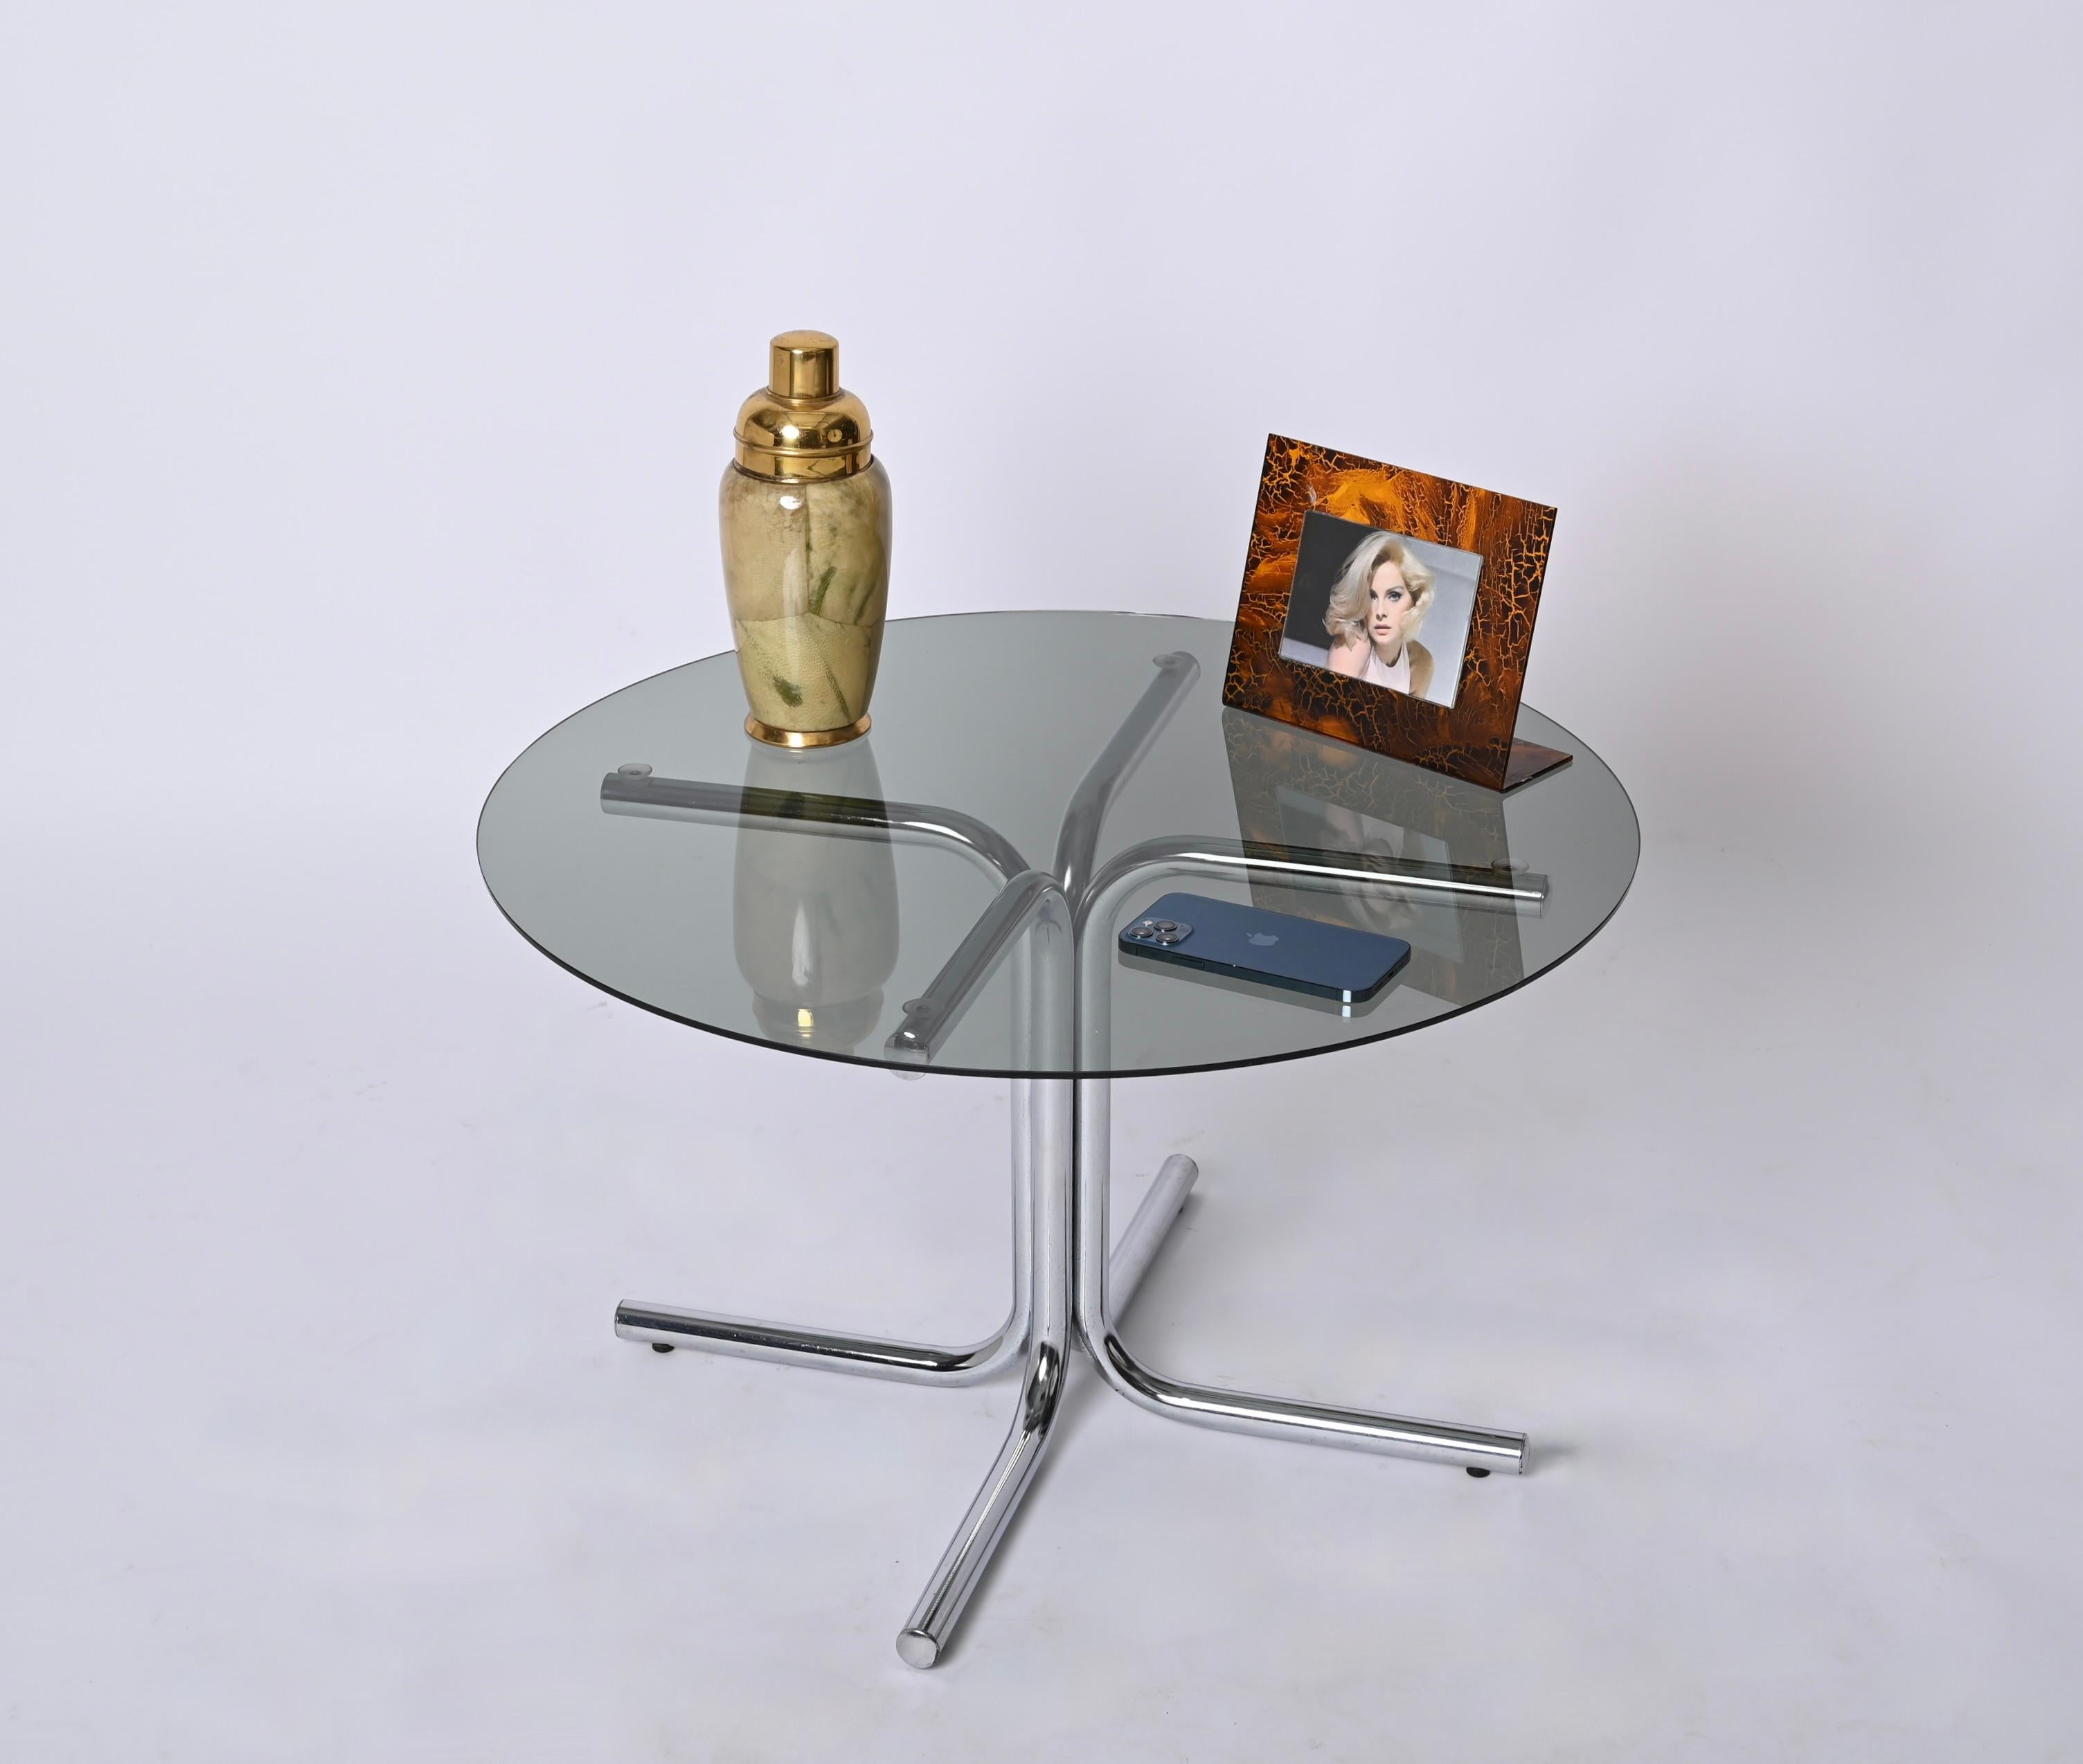 Chrome and Smoked Glass Round Italian Coffee Table, Giotto Stoppino Style, 1970s For Sale 4